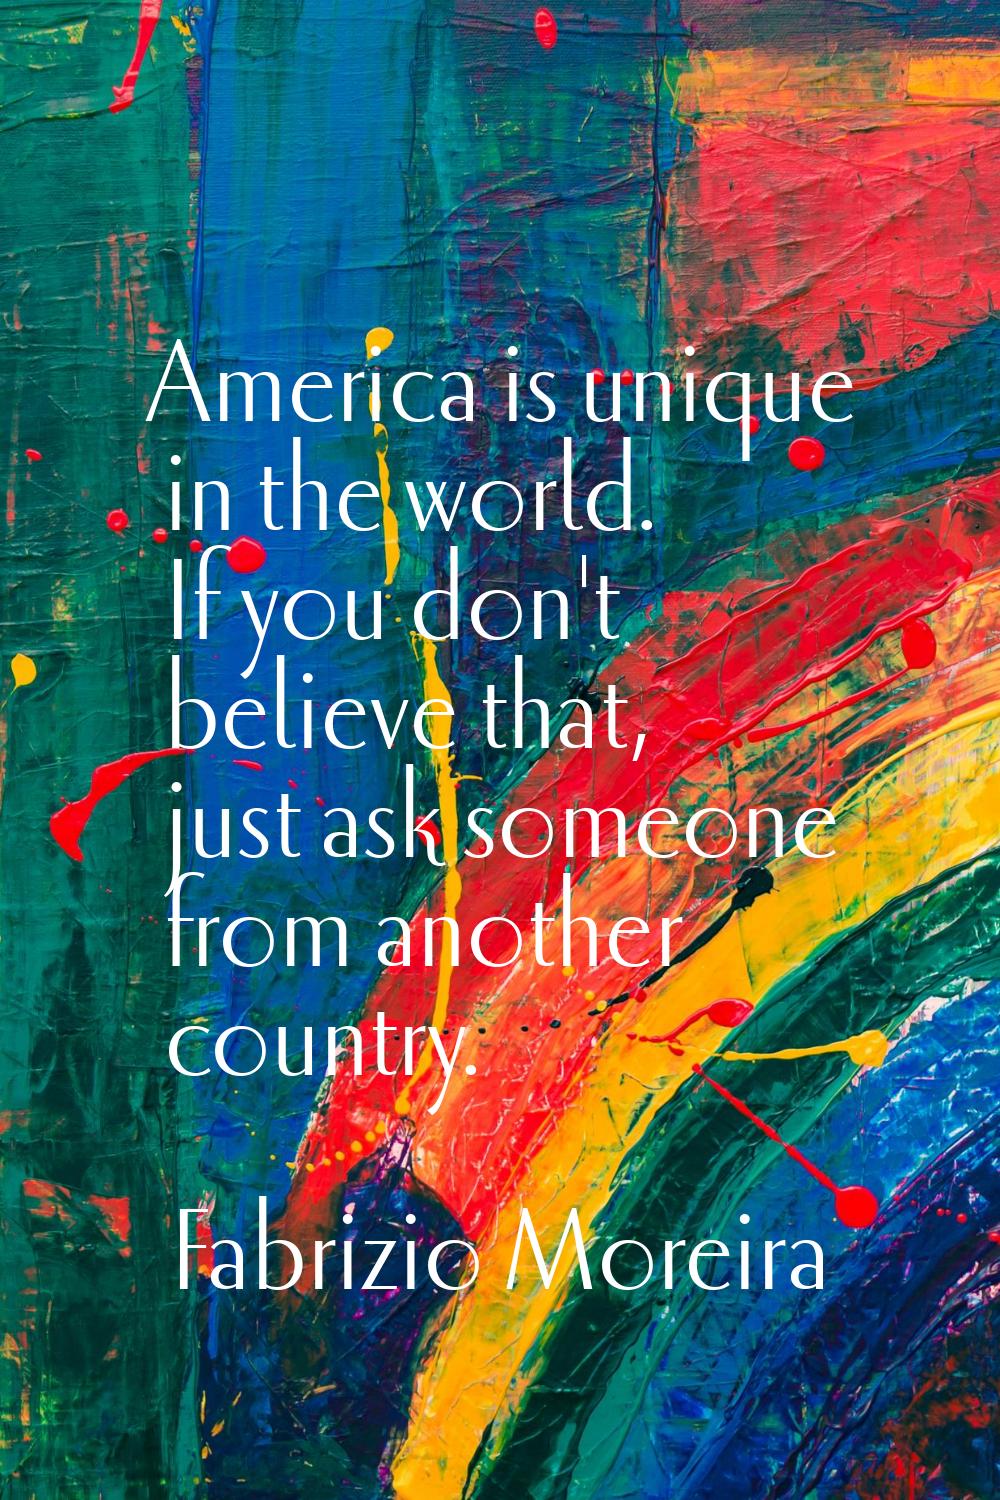 America is unique in the world. If you don't believe that, just ask someone from another country.